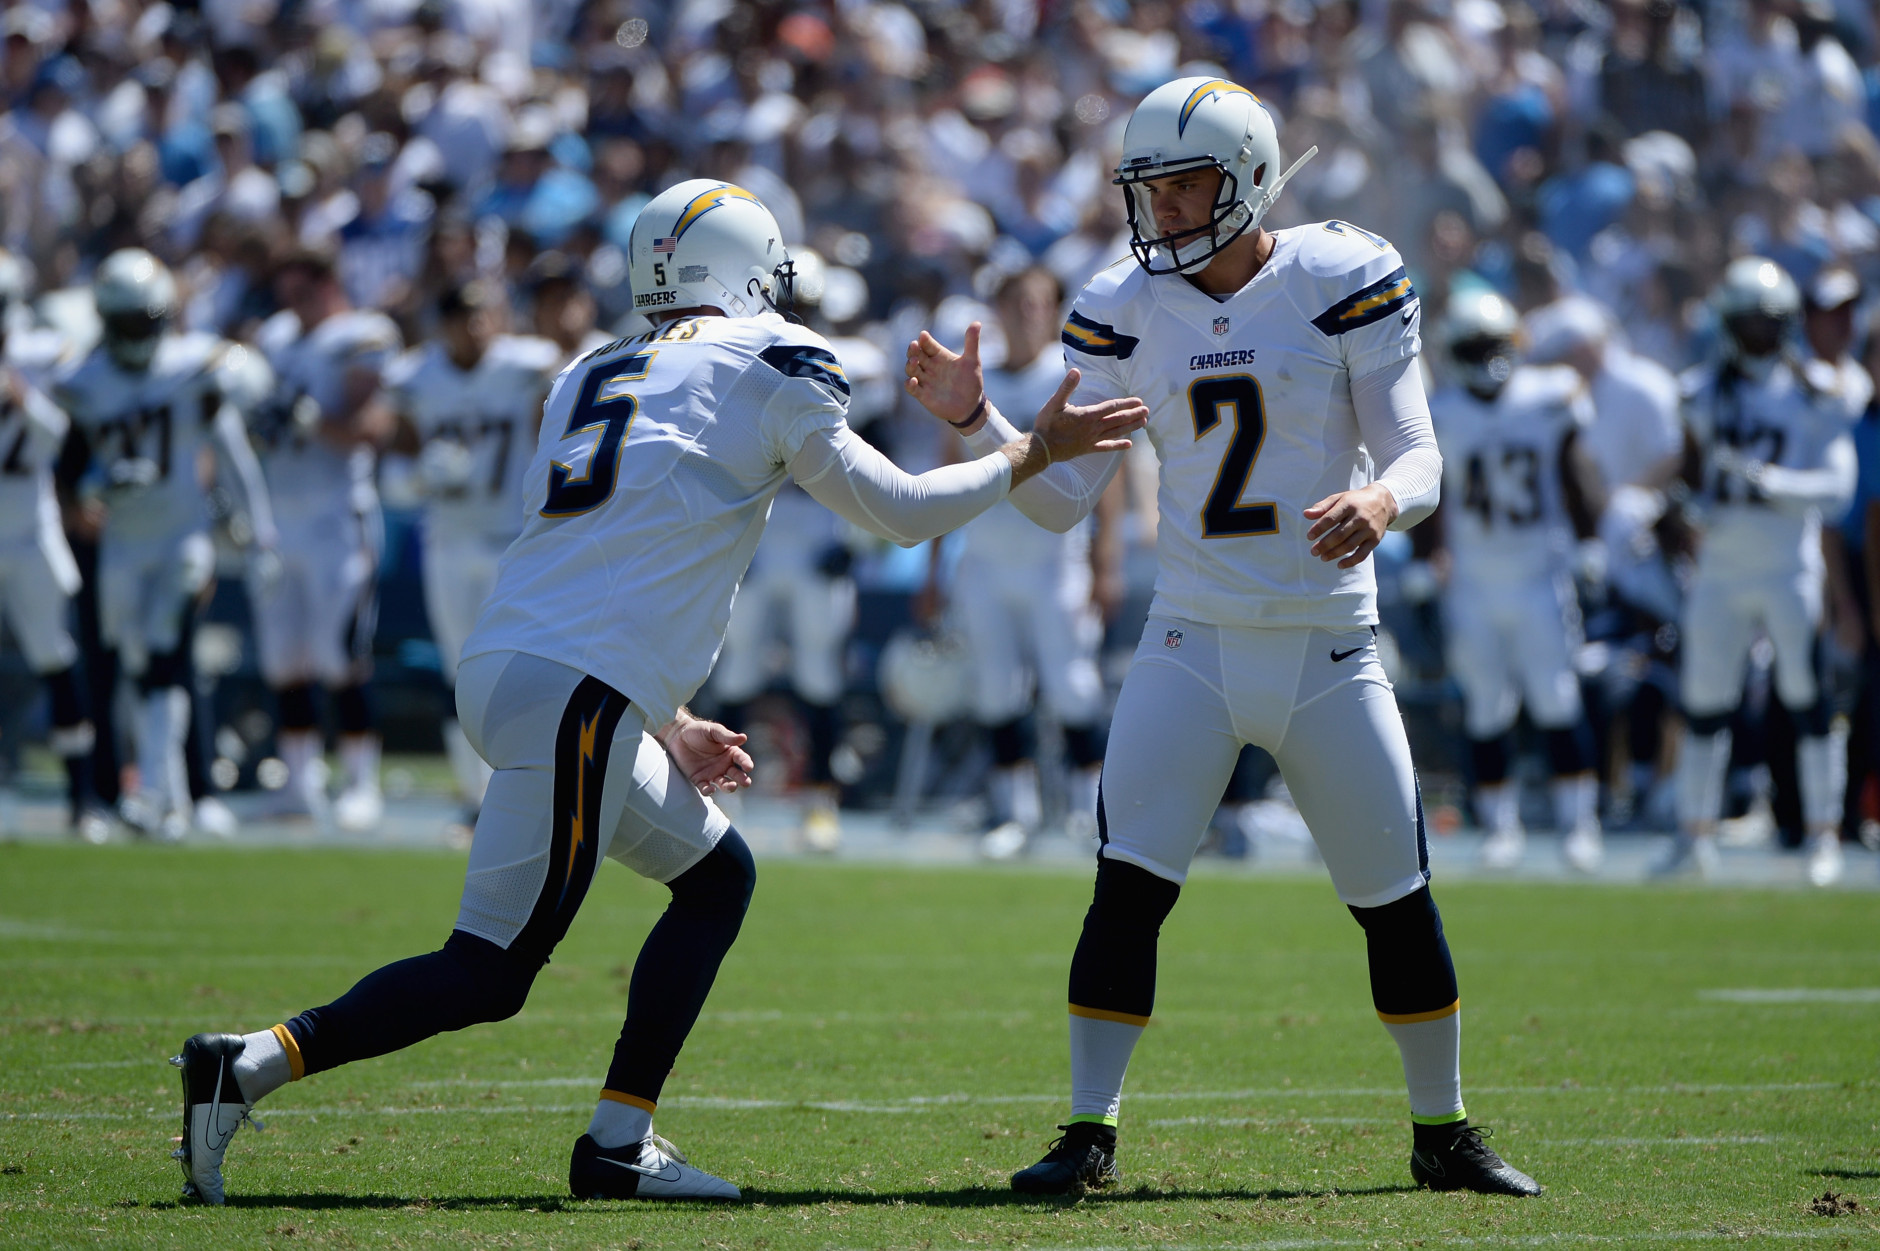 SAN DIEGO, CA - SEPTEMBER 13:  Kicker Josh Lambo #2 is congratulated by punter Mike Scifres #5 of the San Diego Chargers after a field goal against the Detroit Lions at Qualcomm Stadium on September 13, 2015 in San Diego, California.  (Photo by Donald Miralle/Getty Images)